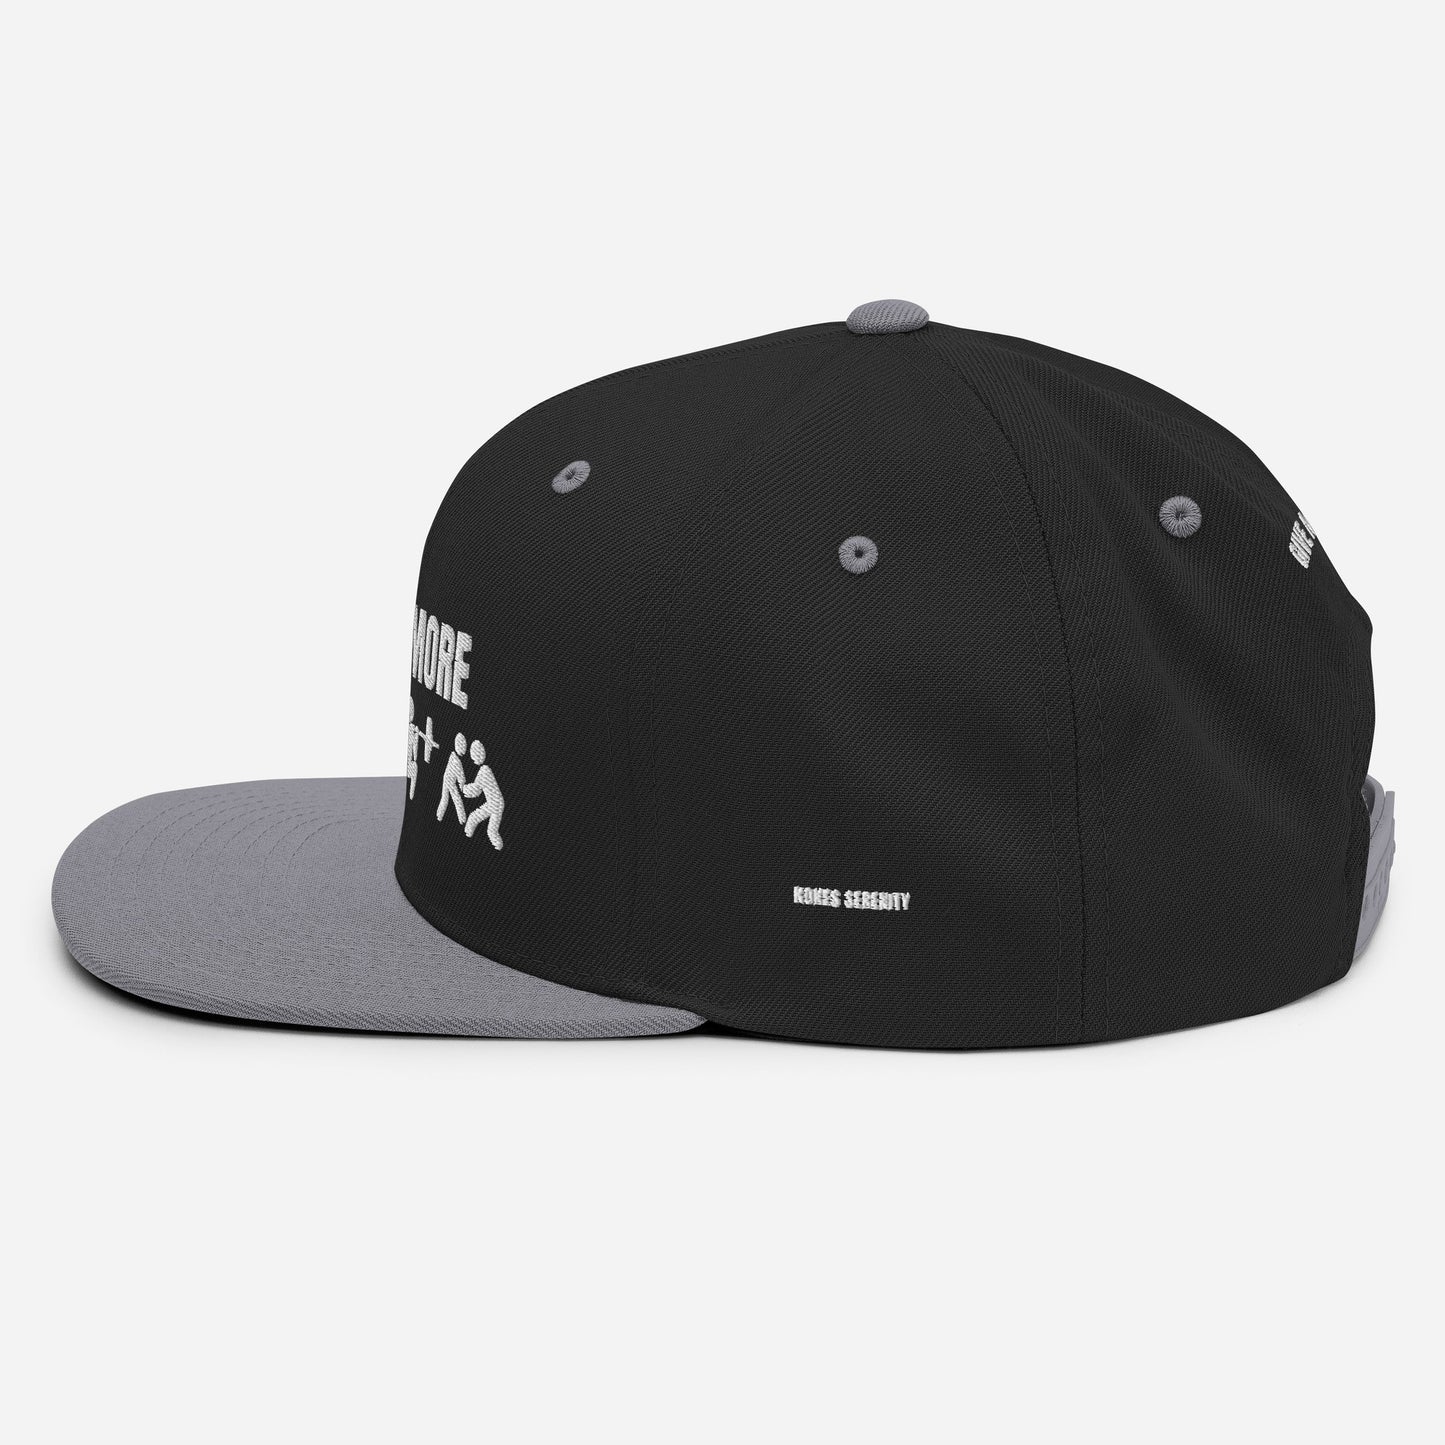 Casquette Hones Serenity Brodée "GIVE ME MORE"